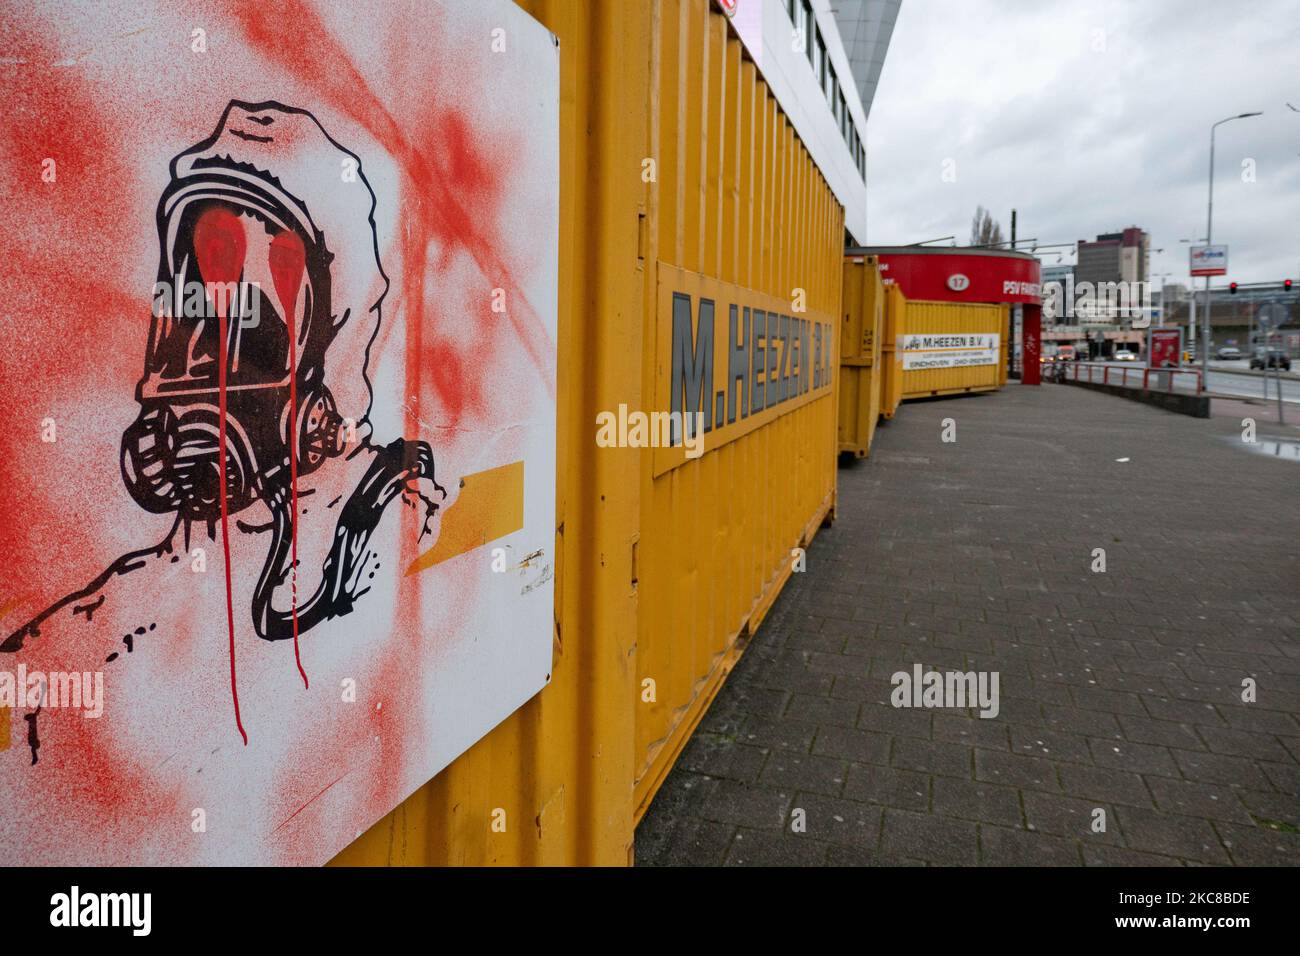 A sign of a man with chemical protection mask as seen vandalized with graffiti on the containers. The Philips Stadion, PSV club stadium in the Dutch city of Eindhoven is barricaded with shipping containers to protect the building, the museum, fanstore, multiple gates, trackside and supporters home side from riots and looting as happened previously in the city. The fortification and sealing of the front side of the stadium took place after the club received some threats according to the local media. Eindhoven faced some violent clashes during an anti-lockdown / anti-curfew protest that turned i Stock Photo